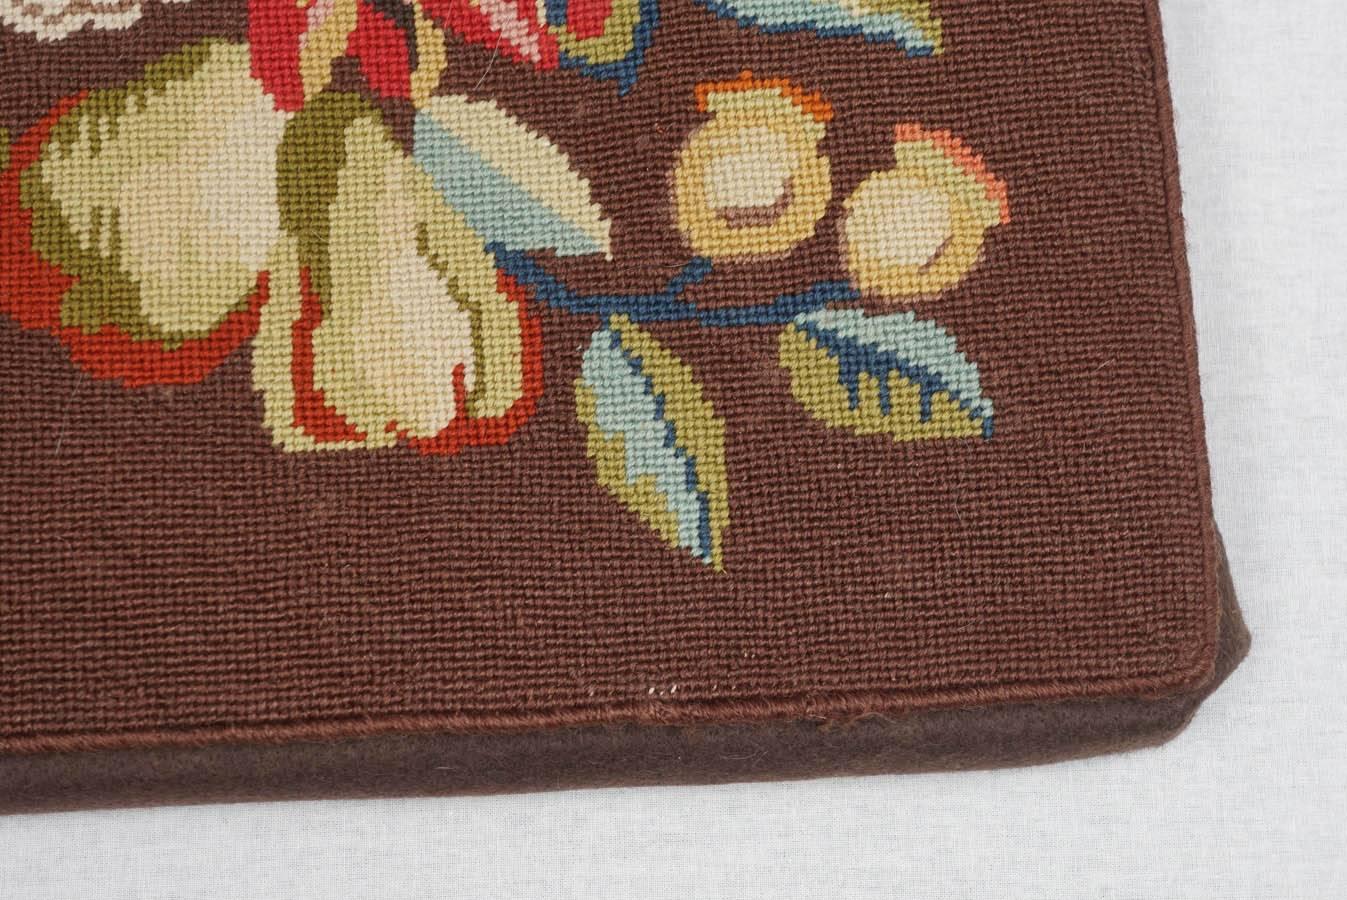 American Mounted Handmad Needlepoint, Large Floral Arrangement For Sale